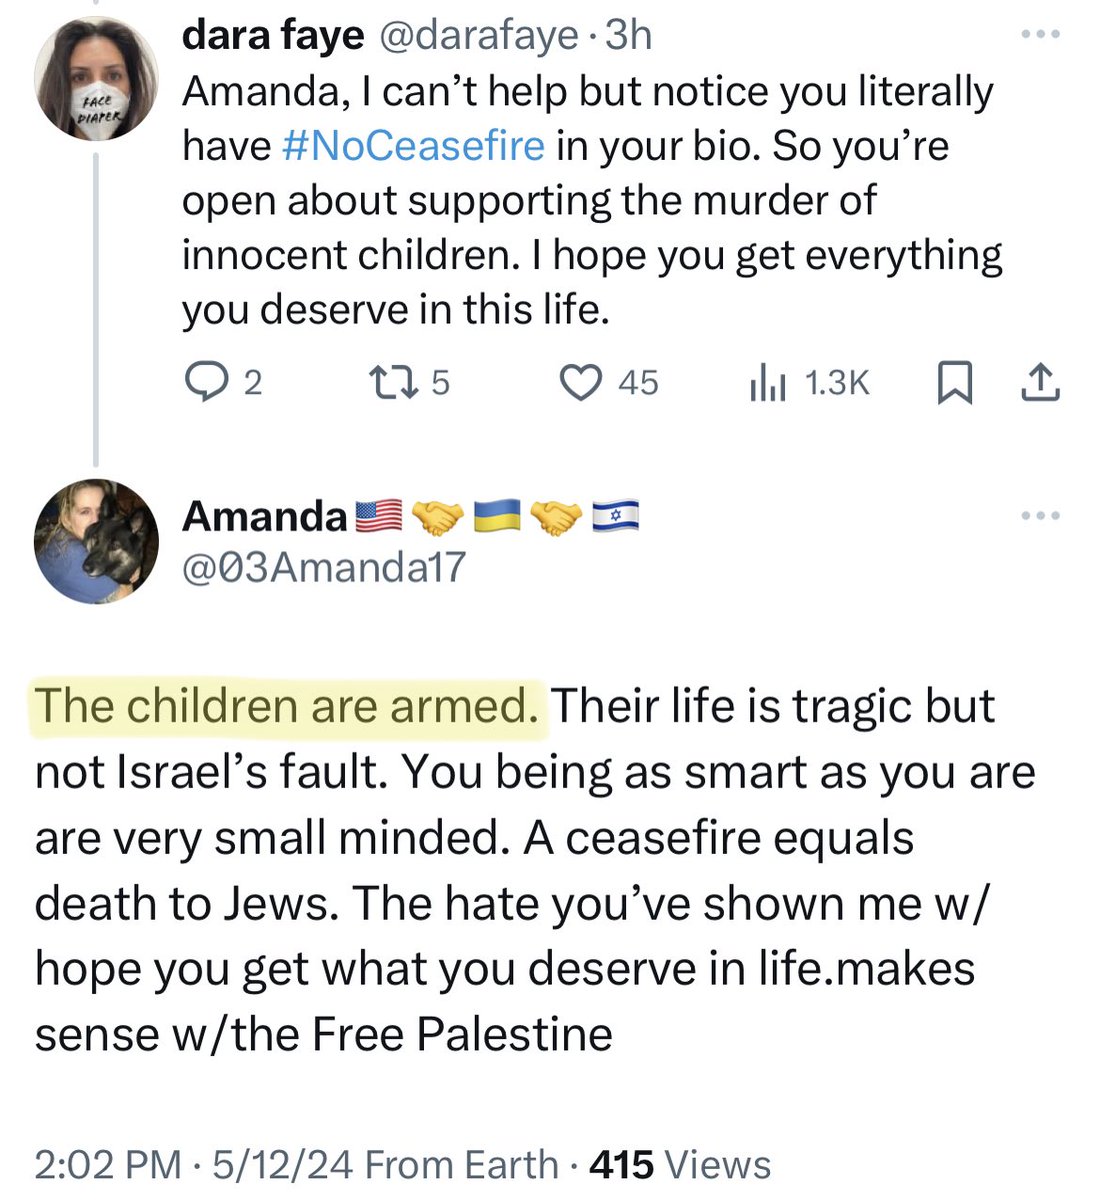 Falsely claiming 'tHe cHiLdReN aRe aRmEd' to try and rationalize Israel's genocide is the most morally indefensible logic I've seen thus far